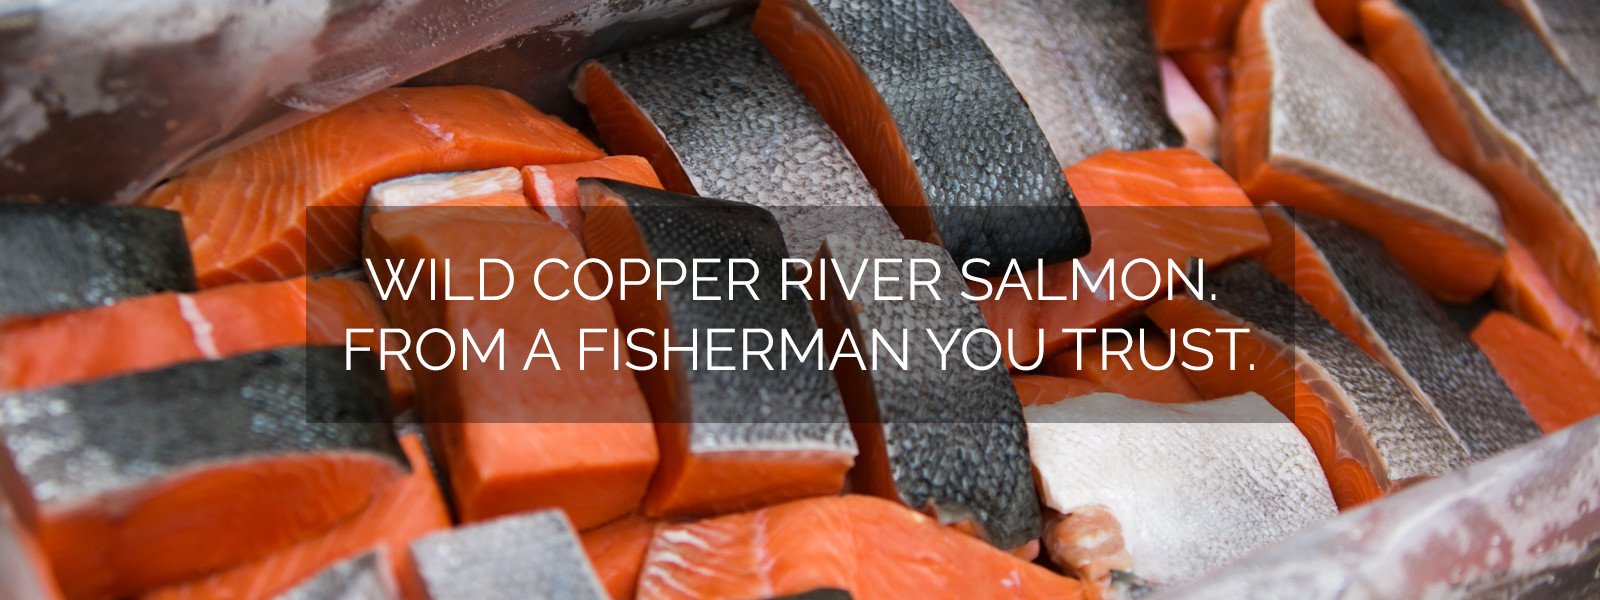 Wild Copper River Salmon from a fisherman you trust.